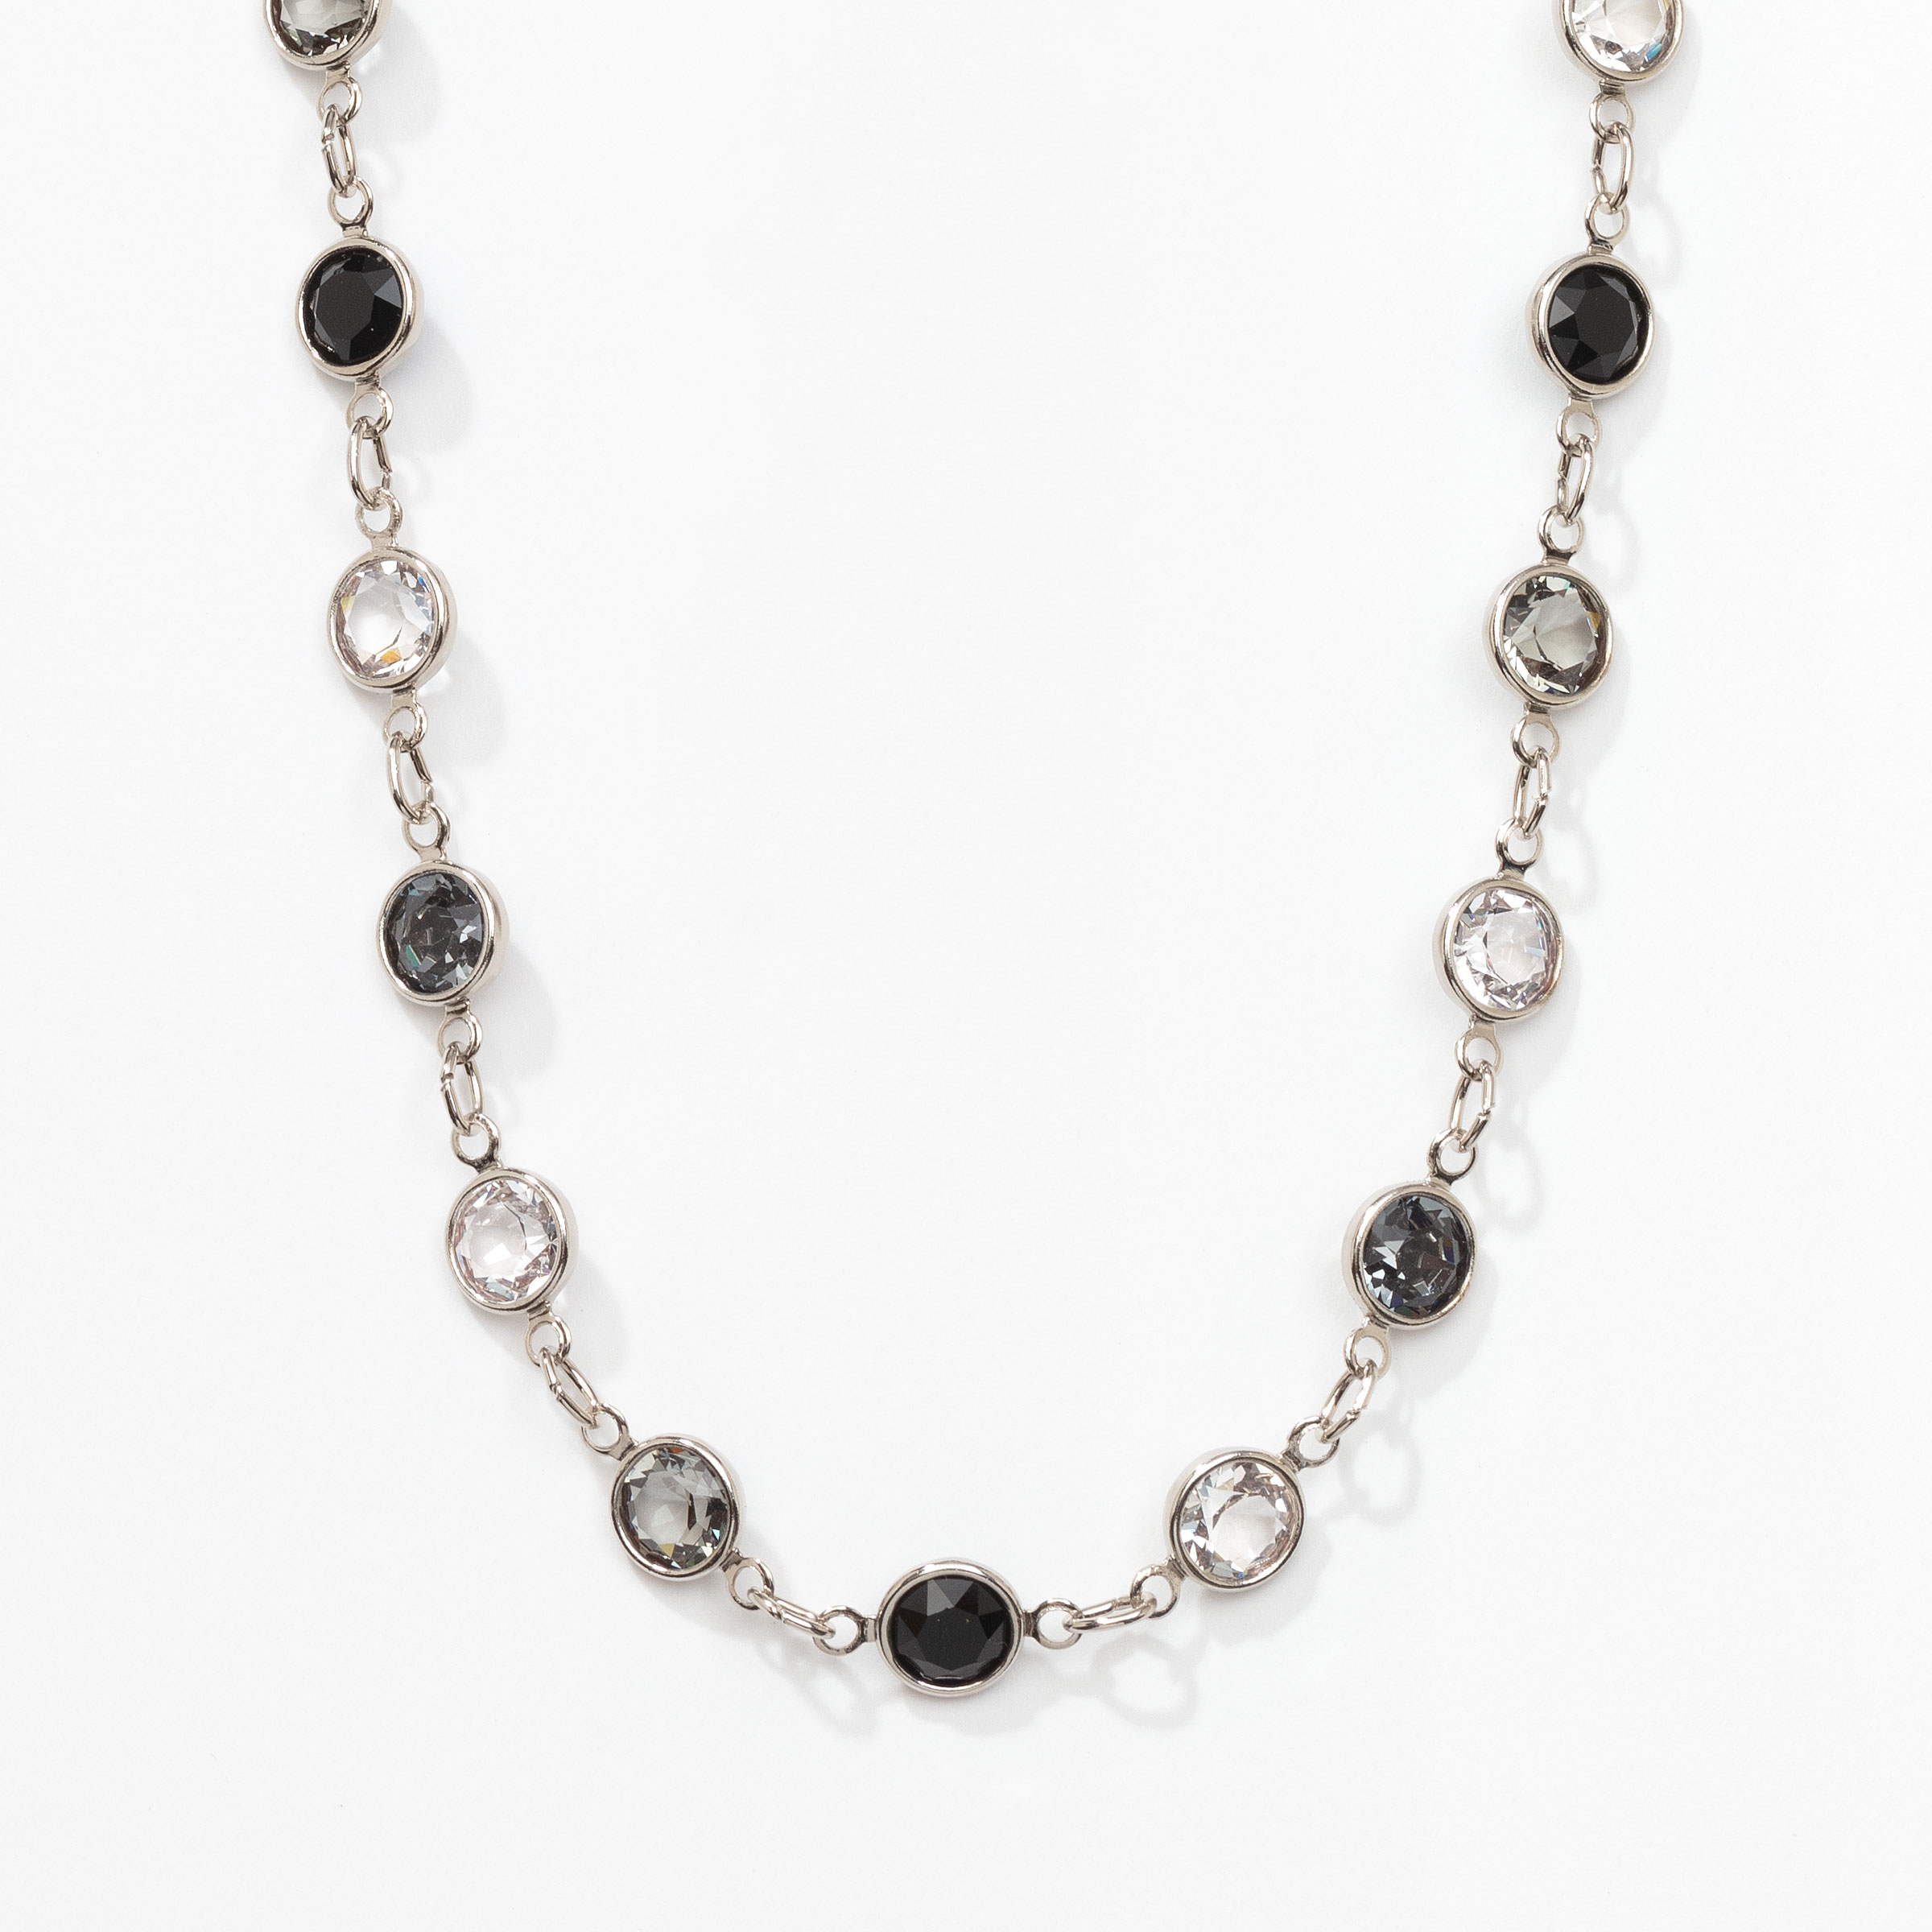 Chanelle Necklace, Nighttime